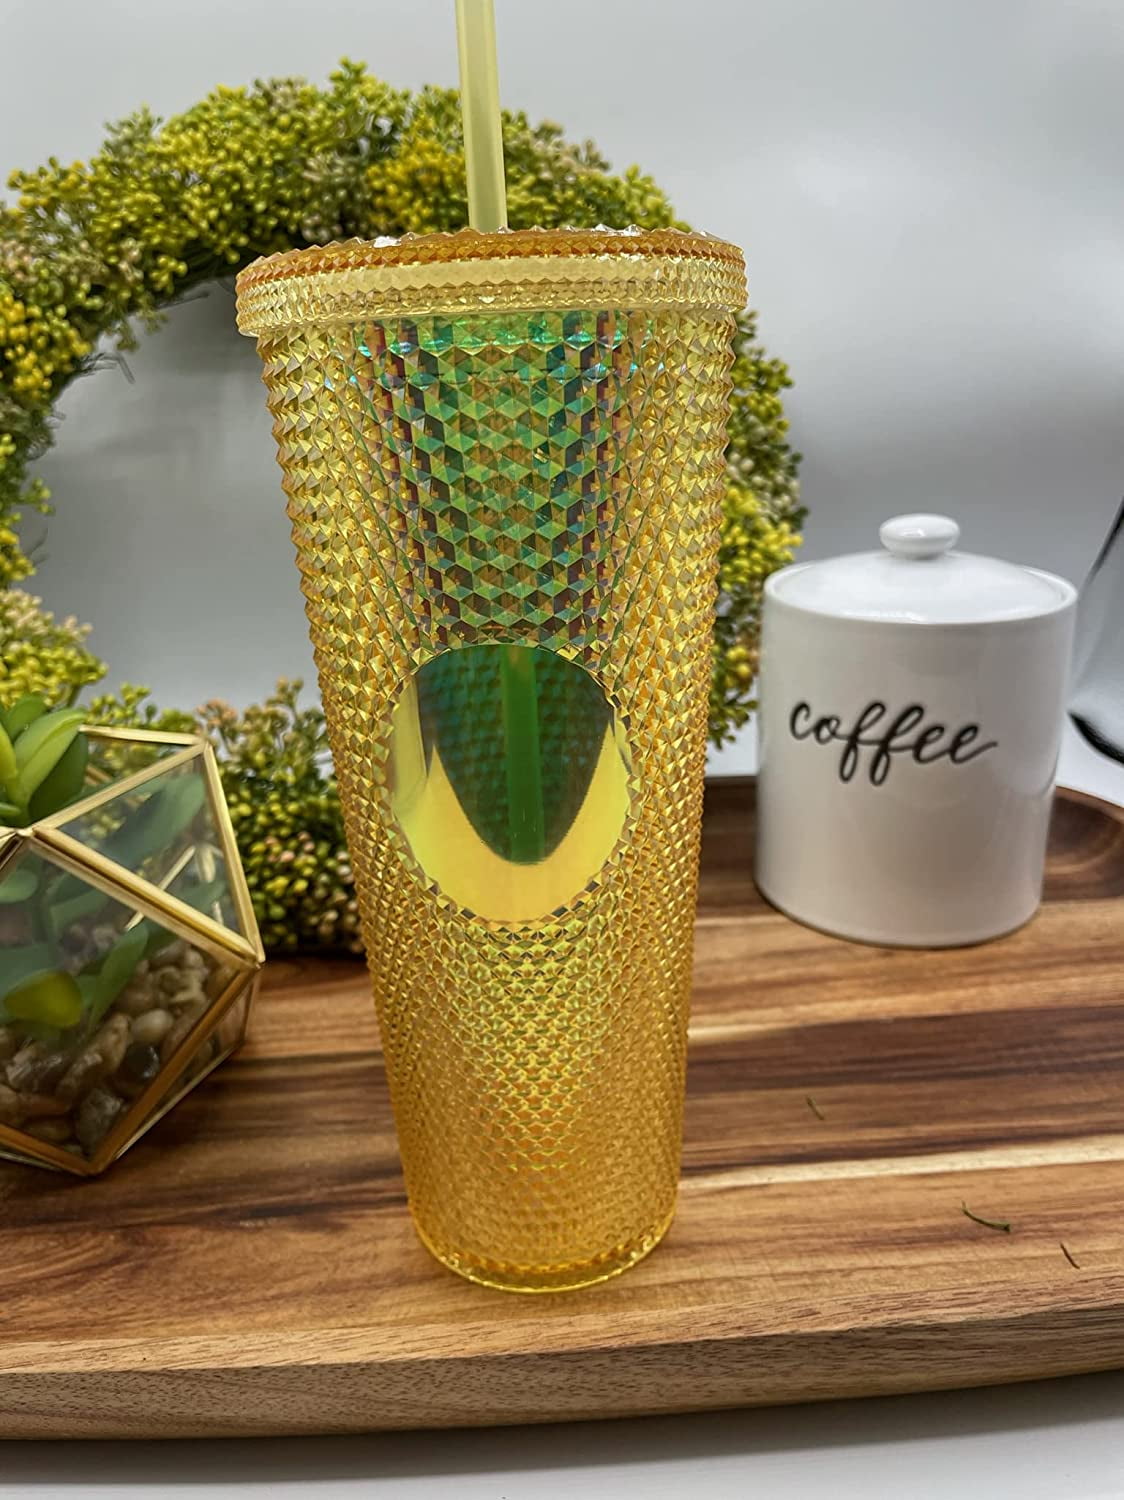 Reusable Iced Coffee Cup (24 Oz/Venti), Leak Proof and Double Wall  Insulated Iced Coffee Tumbler, Come with Reusable Plastic and Metal Straws  and Straw Cleaner Clear 24.0 ounces